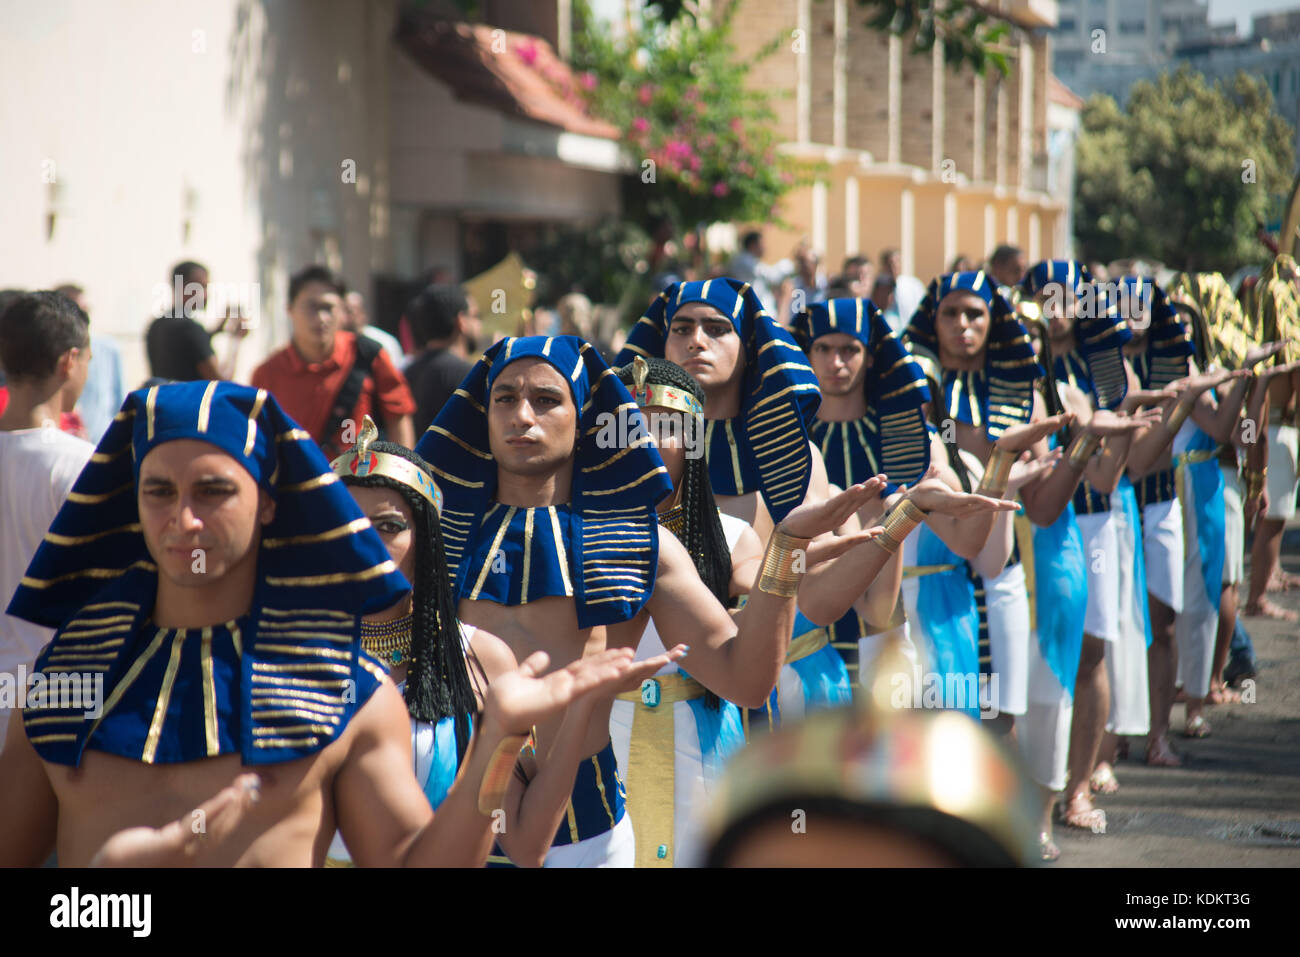 Alexandria, Egypt - 30 September 2017 - The inaugural festival in honor of Cleopatra coincided today with World Tourism Day.  The event included a parade along the corniche seafront with Cleopatra dressed in her golden royal robes and distinctive crown, accompanied by her two ladies-in-waiting and six officers dressed as ancient Egyptian soldiers.  The event also brings awareness about new discoveries made in the bottom of the Mediterranean Sea in the Alexandria area where 72 wrecks, 20 ships and army aircrafts from WWI and WWII and others that date back to 300 BC have been discovered.  An ini Stock Photo